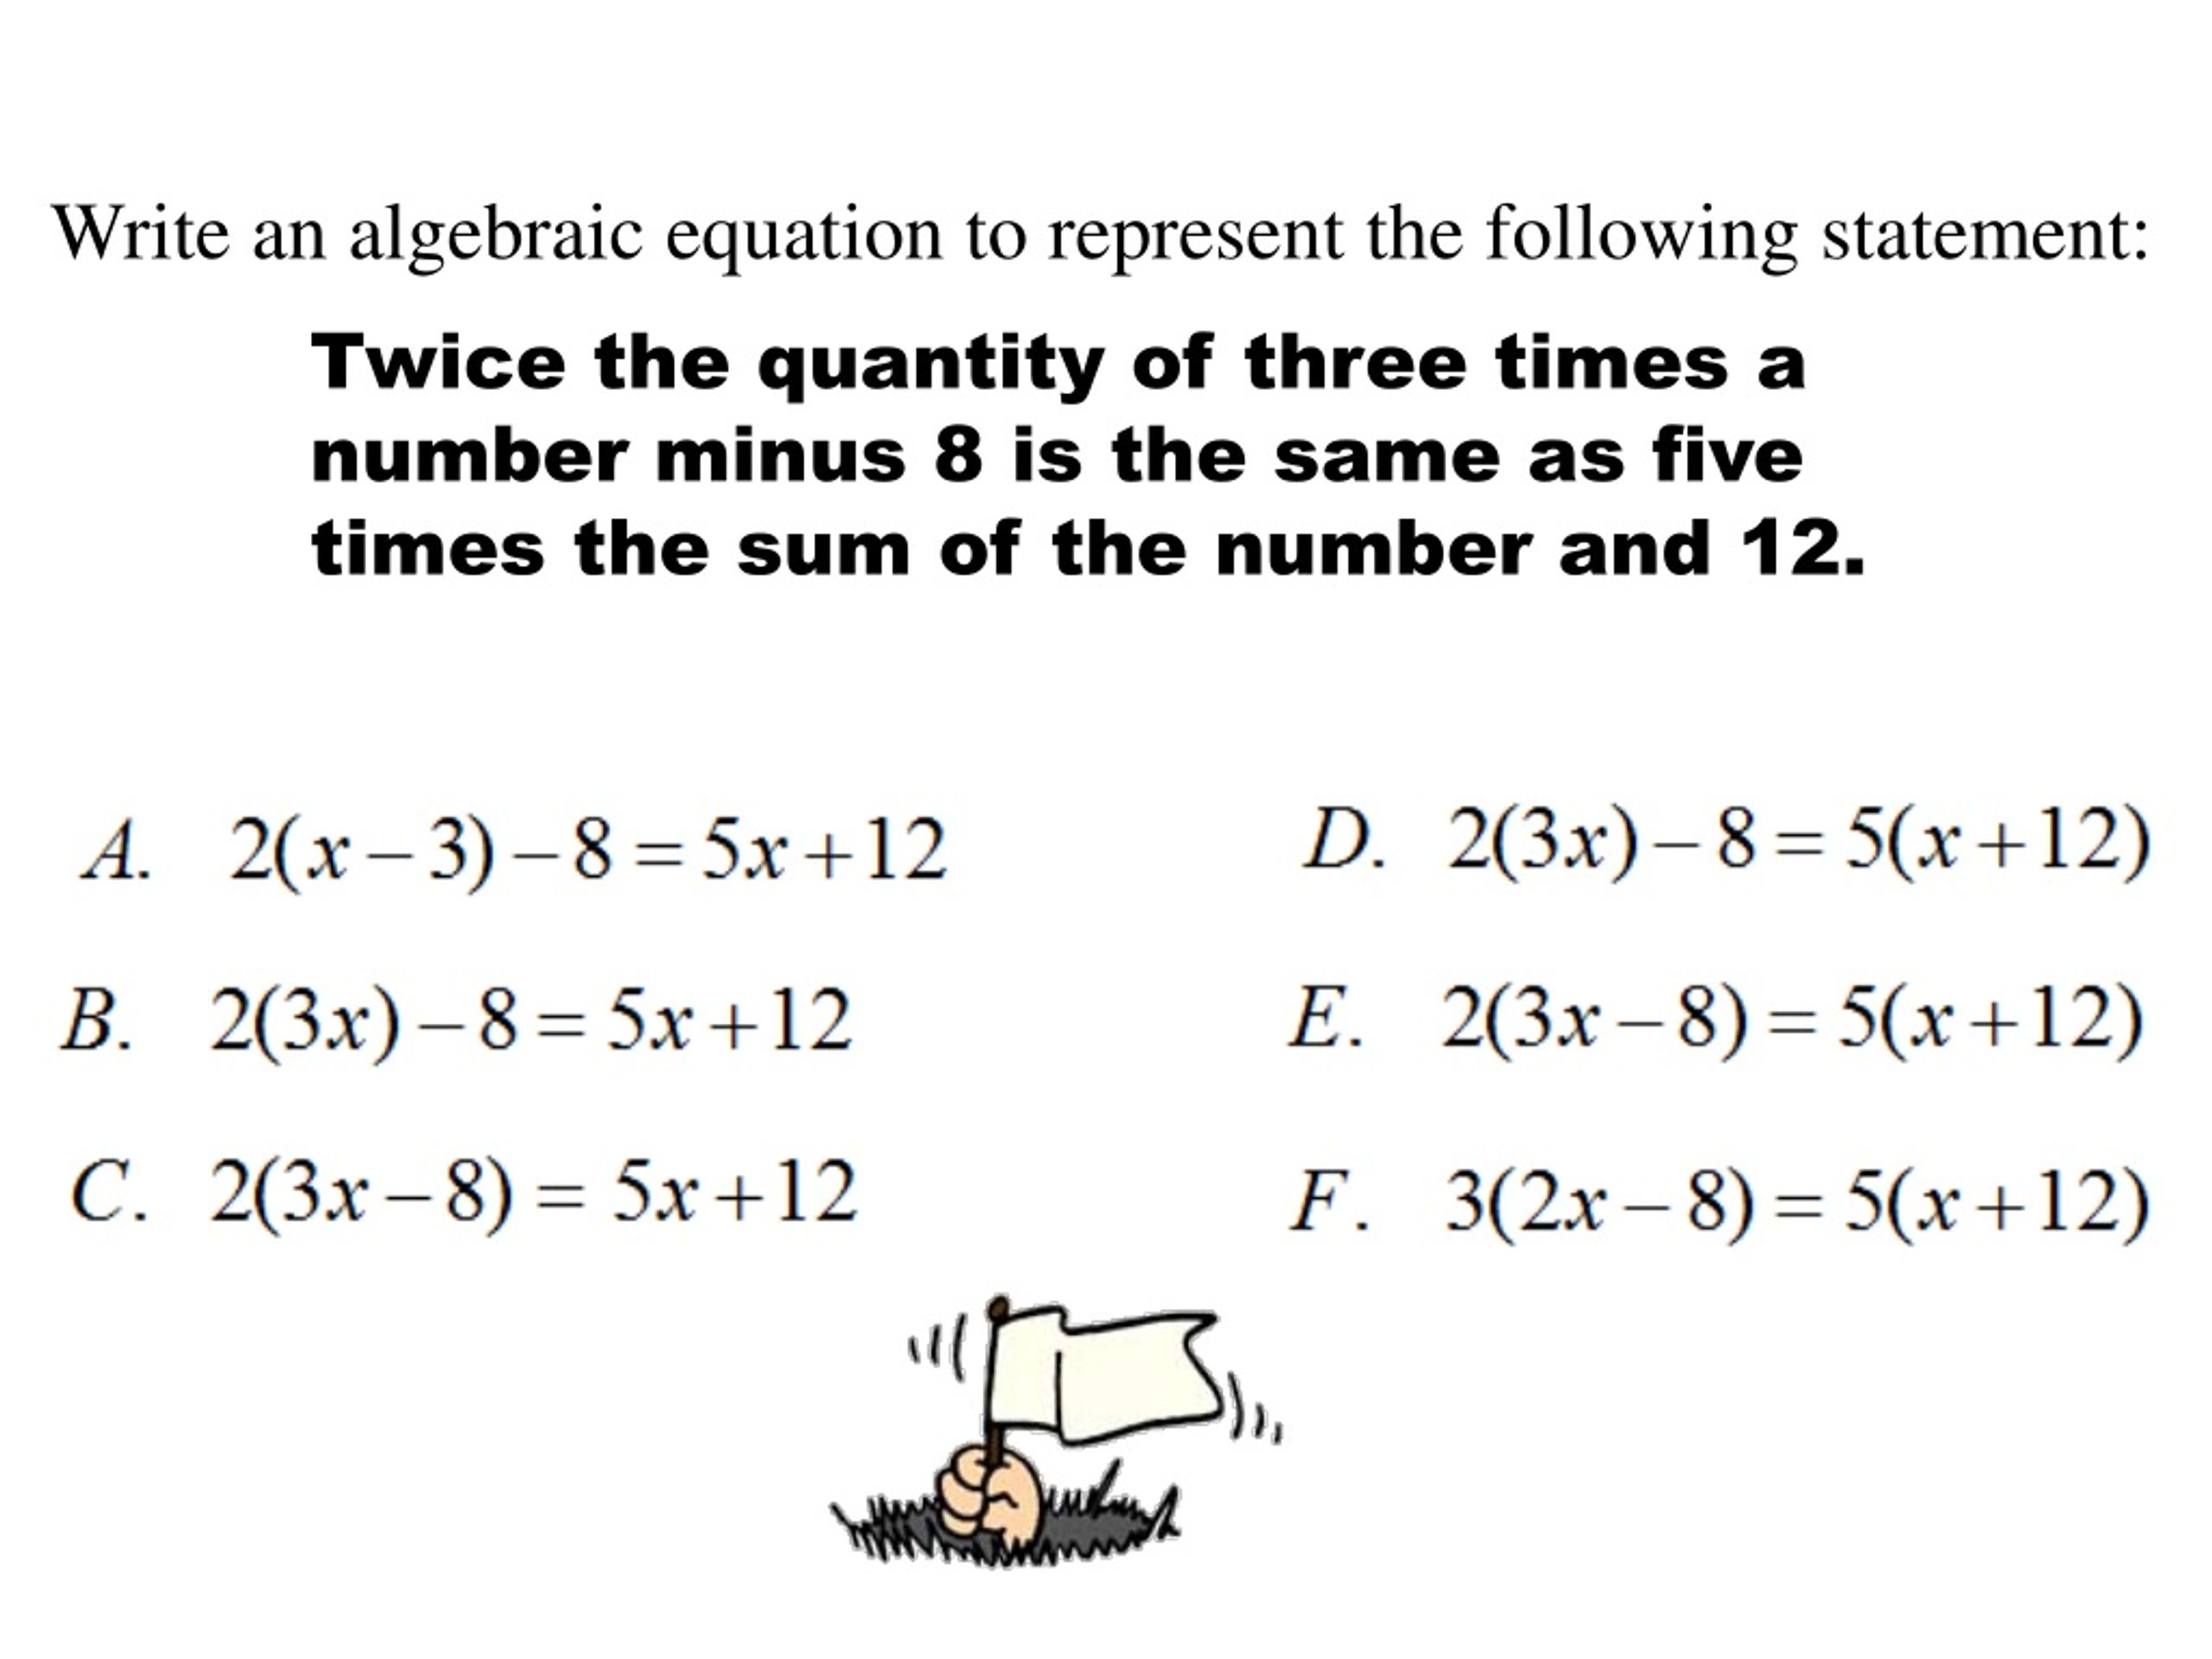 PPT - Five times the difference of x and 28 divided by the sum of x